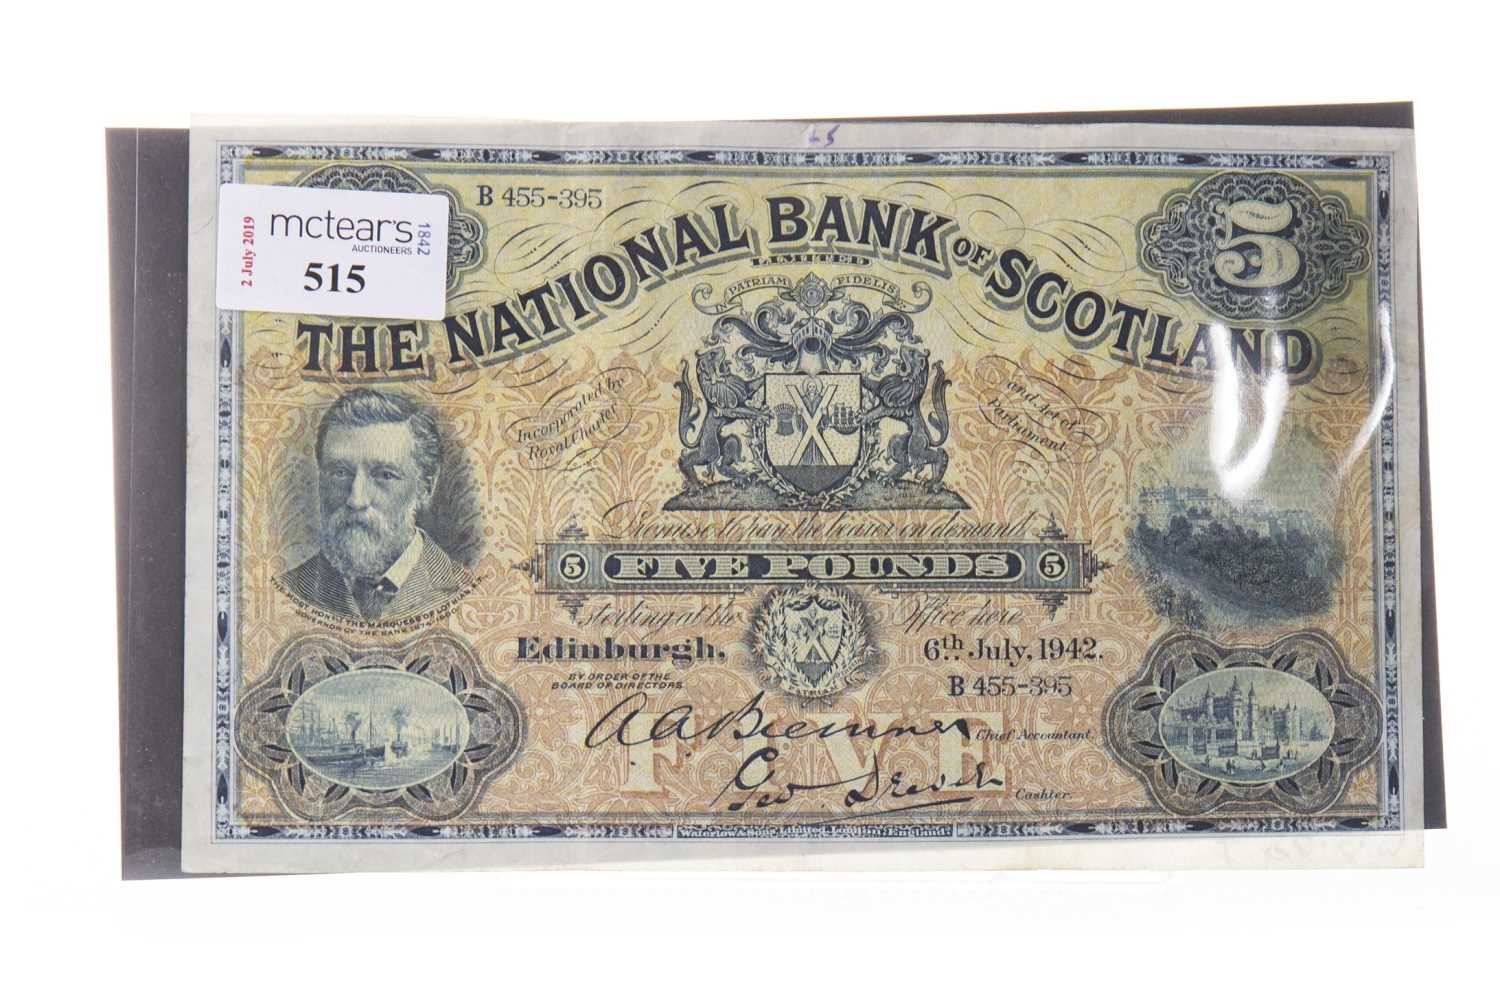 Lot 515 - THE NATIONAL BANK OF SCOTLAND £5 NOTE 1942